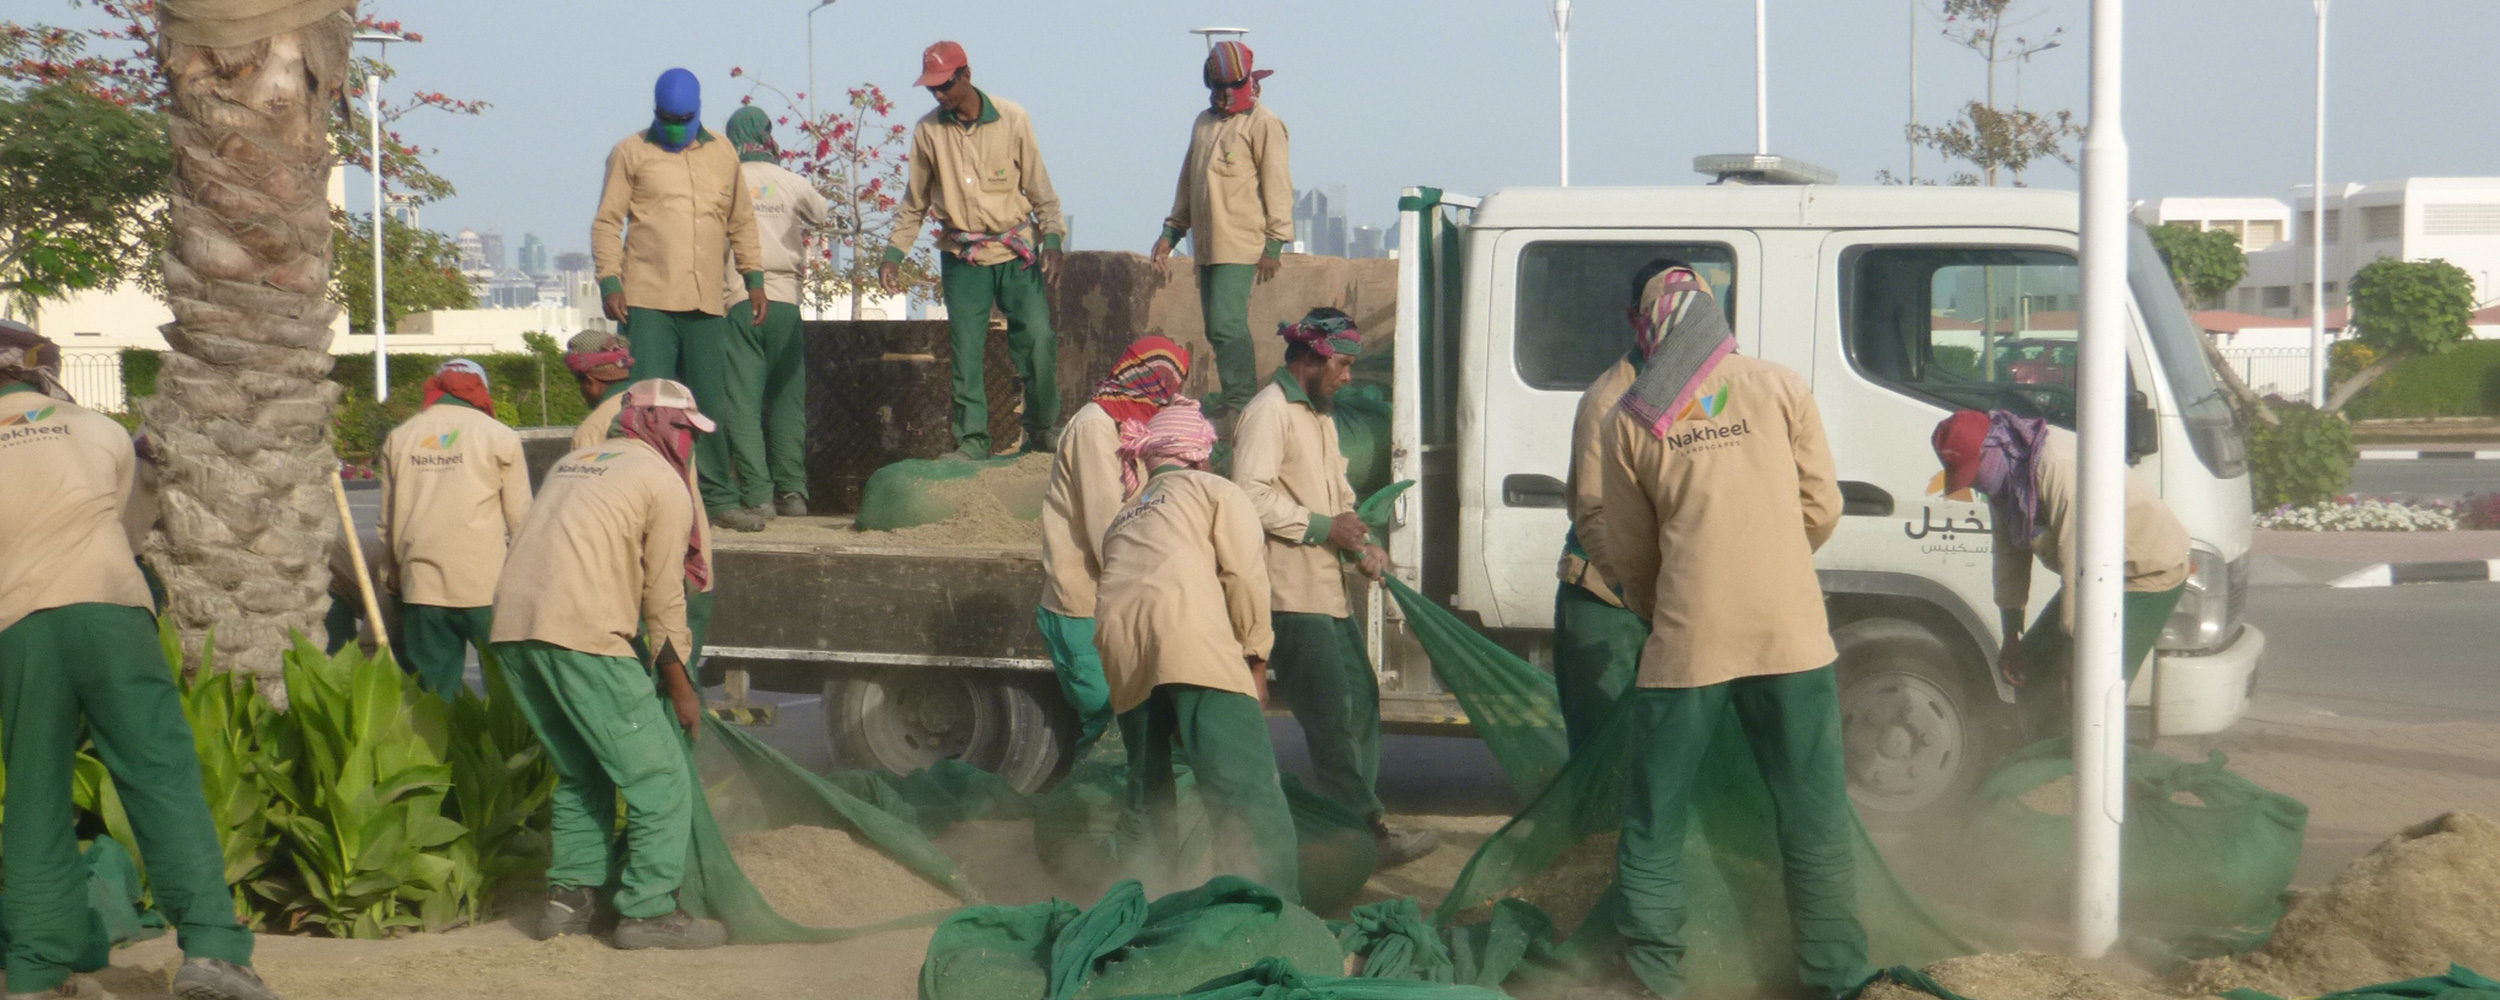 Doha landscaping crew collecting and taking grass clippings to be landfilled, protecting their lungs from the particulates with scarves. Photo © Nance Klehm.